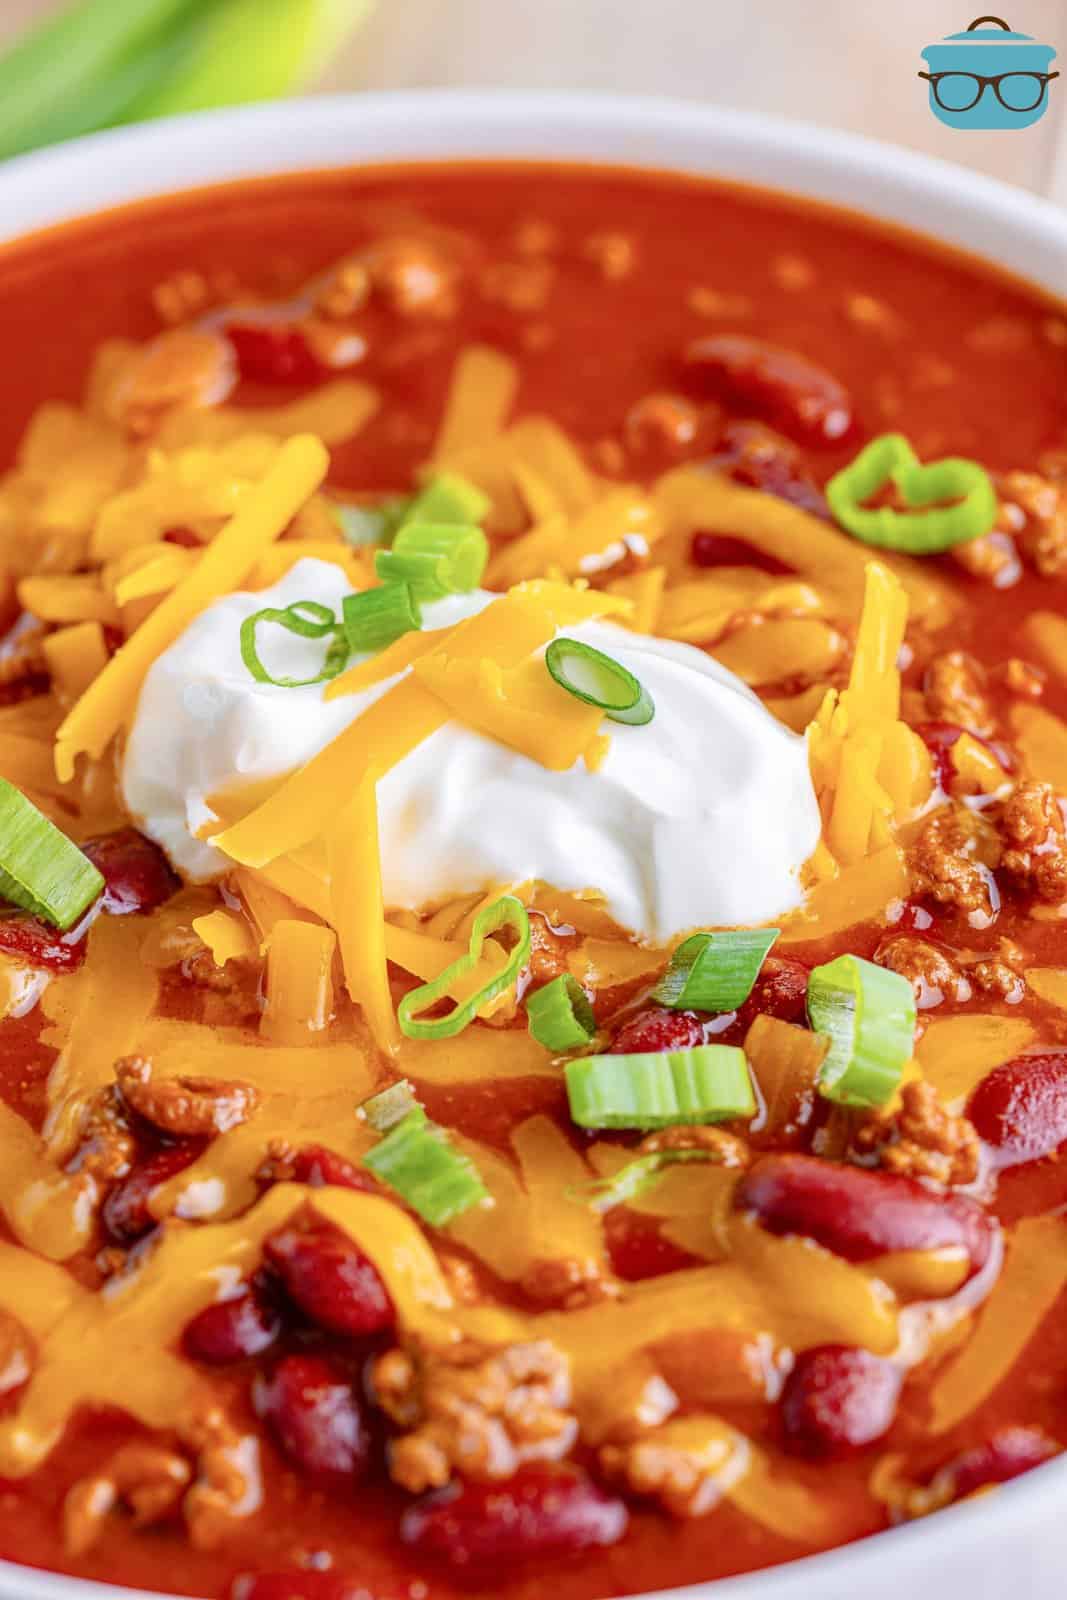 Close up looking at a bowl of chili with shredded cheese, sour cream and chives on top.